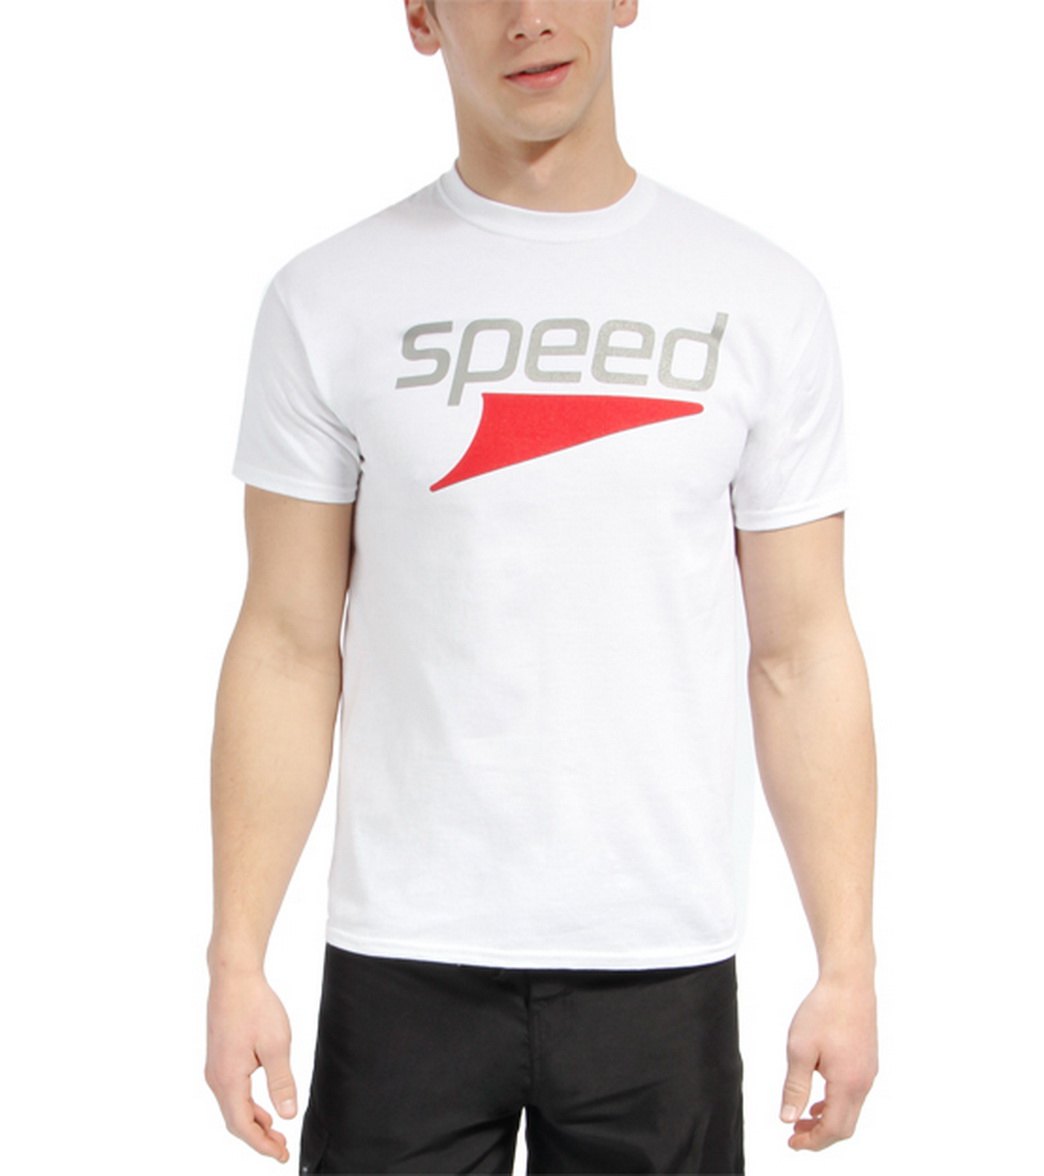 Ambro Manufacturing Men's Speed Tee Shirt - White Youth Small Cotton - Swimoutlet.com